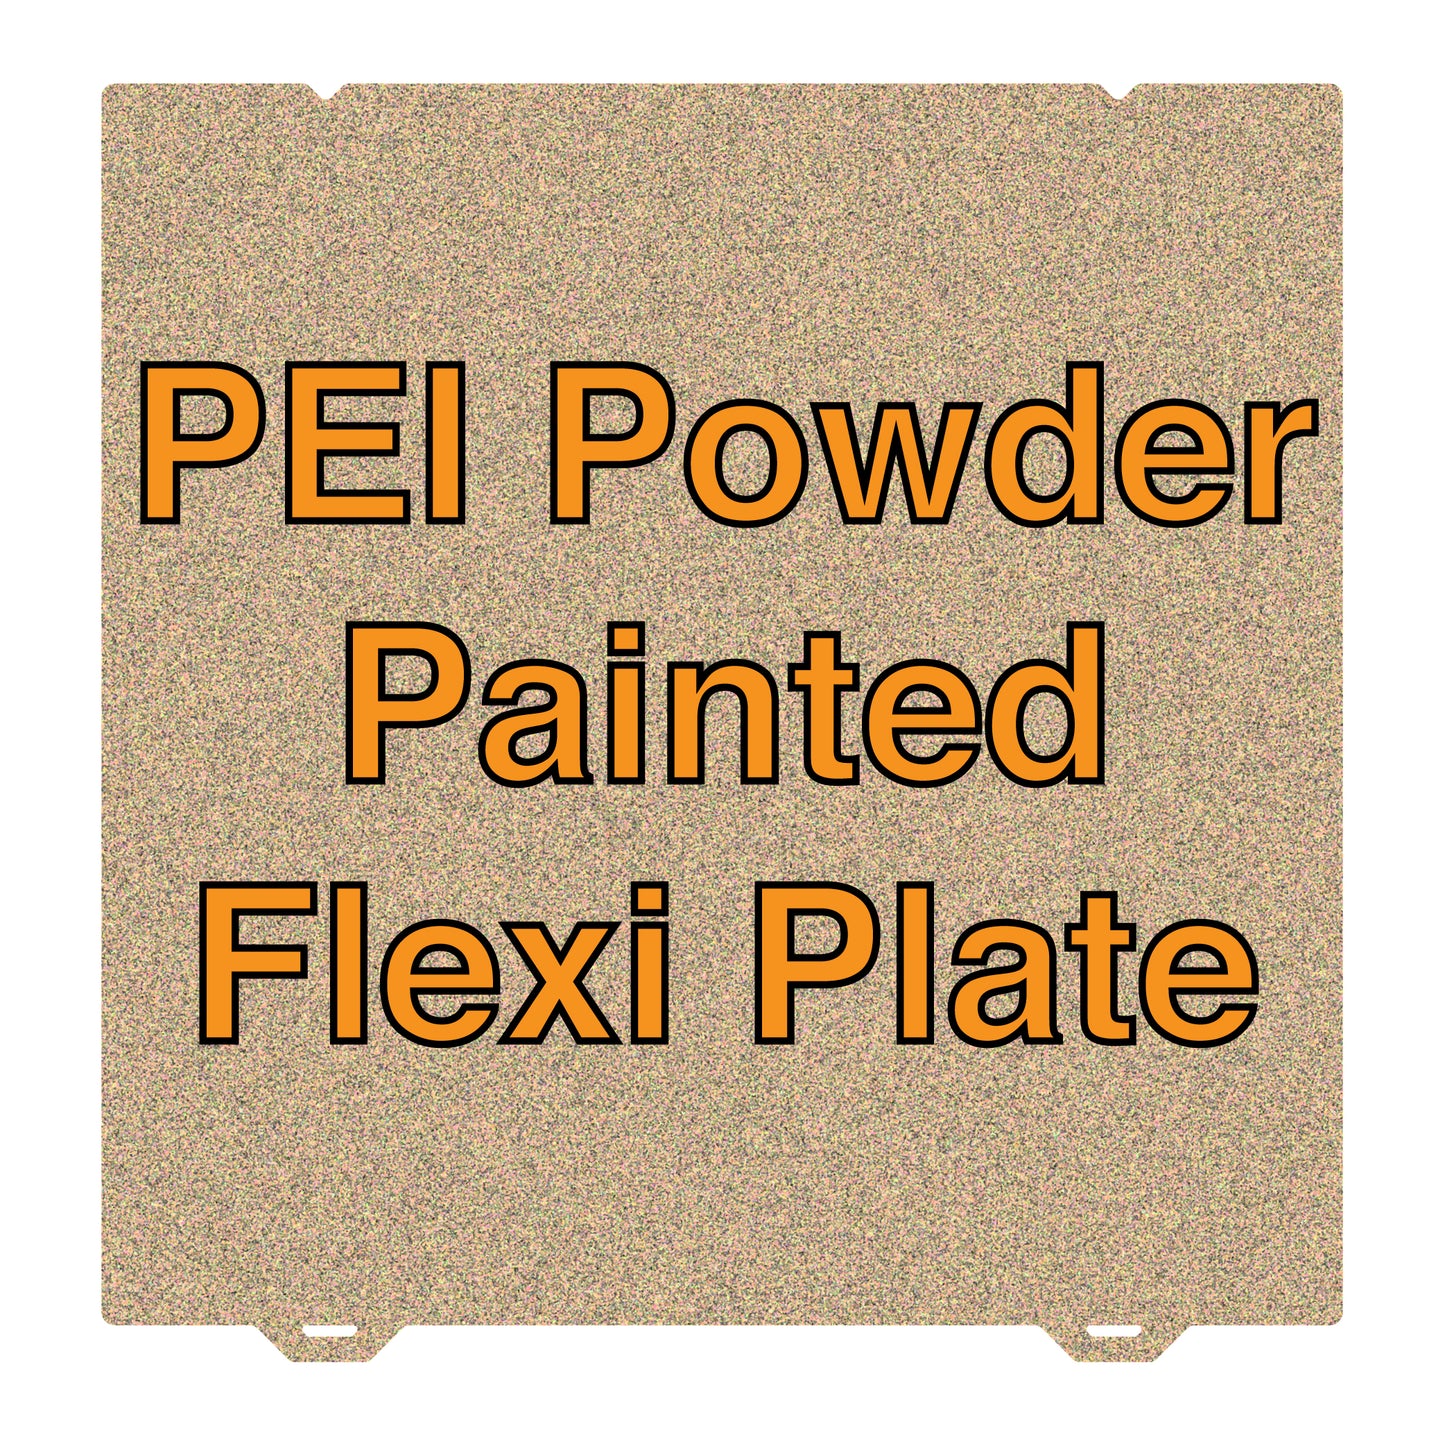 Powder Painted PEI Flexi Plate - 470 x 470 - Creality CR-10 MAX, Creality CR-M4 (Alignment Notches)